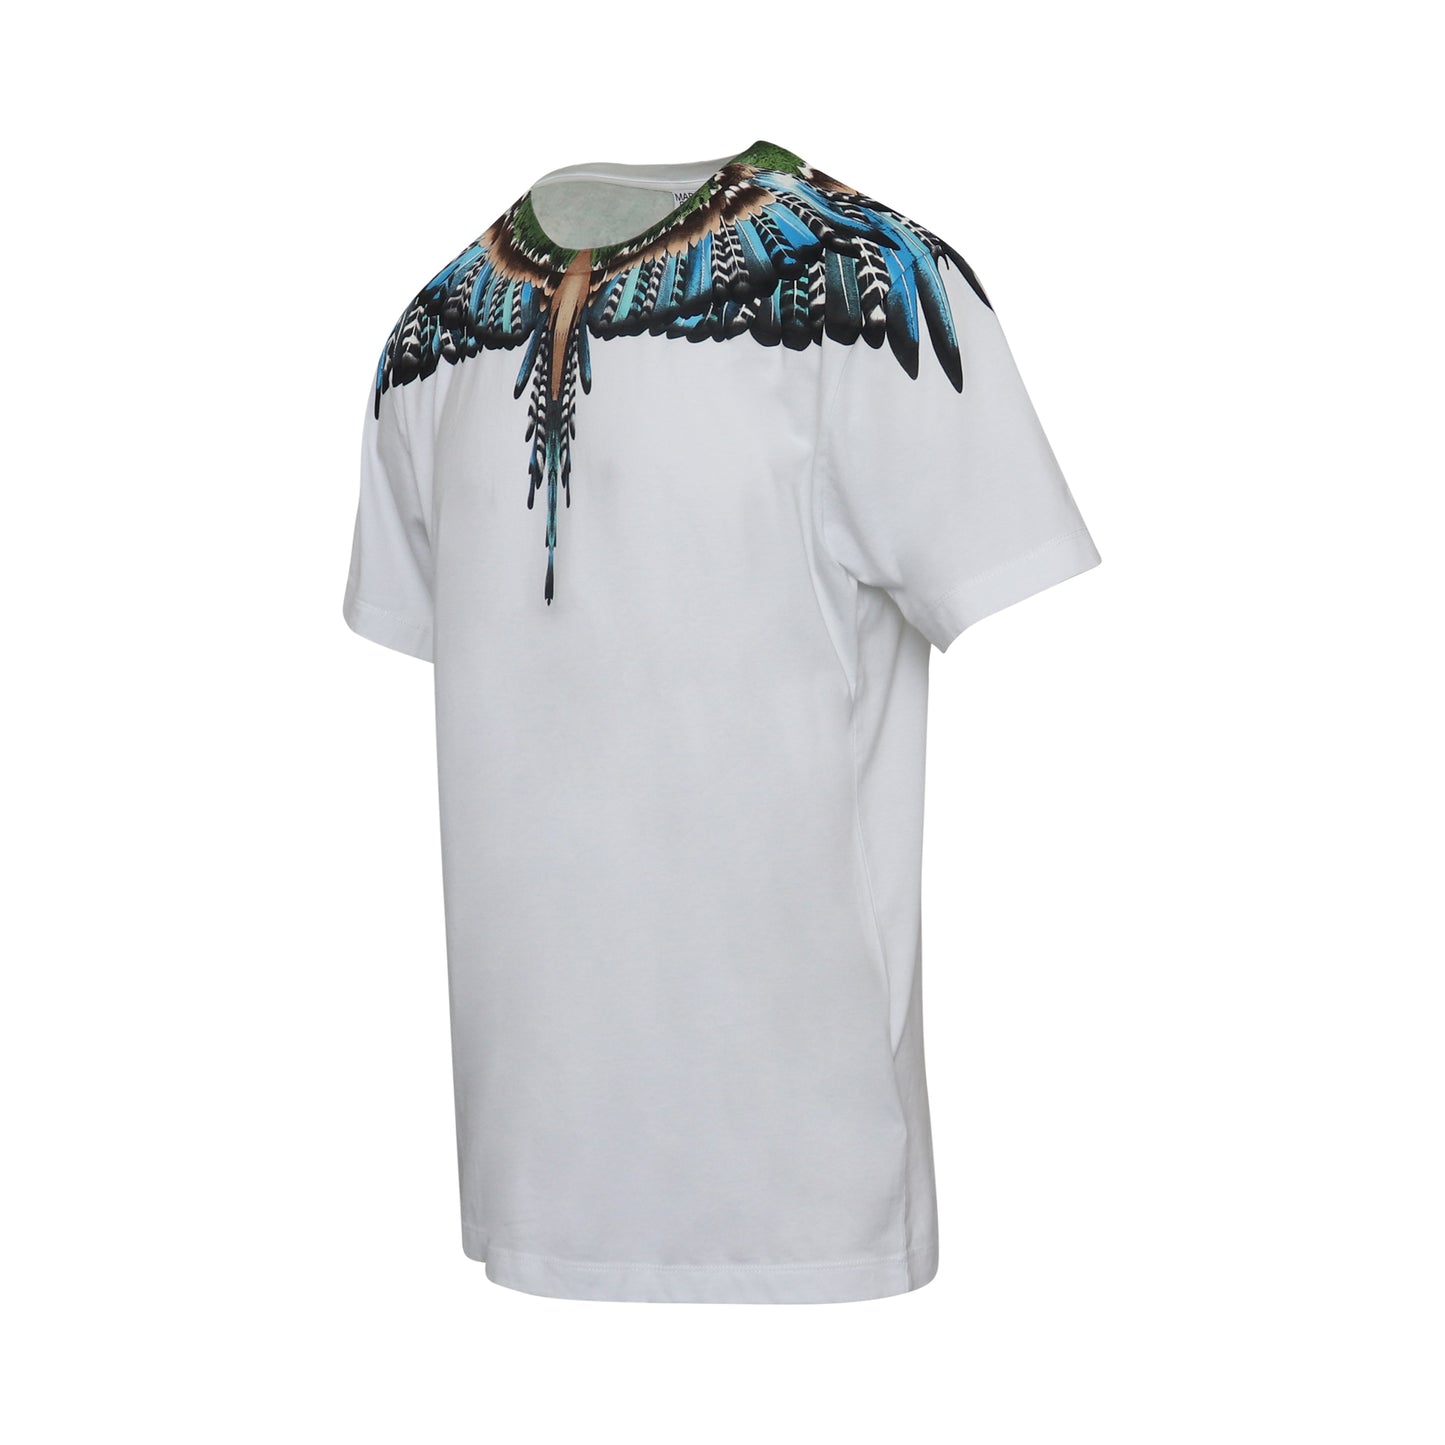 Grizzly Wings Print T-Shirt in White